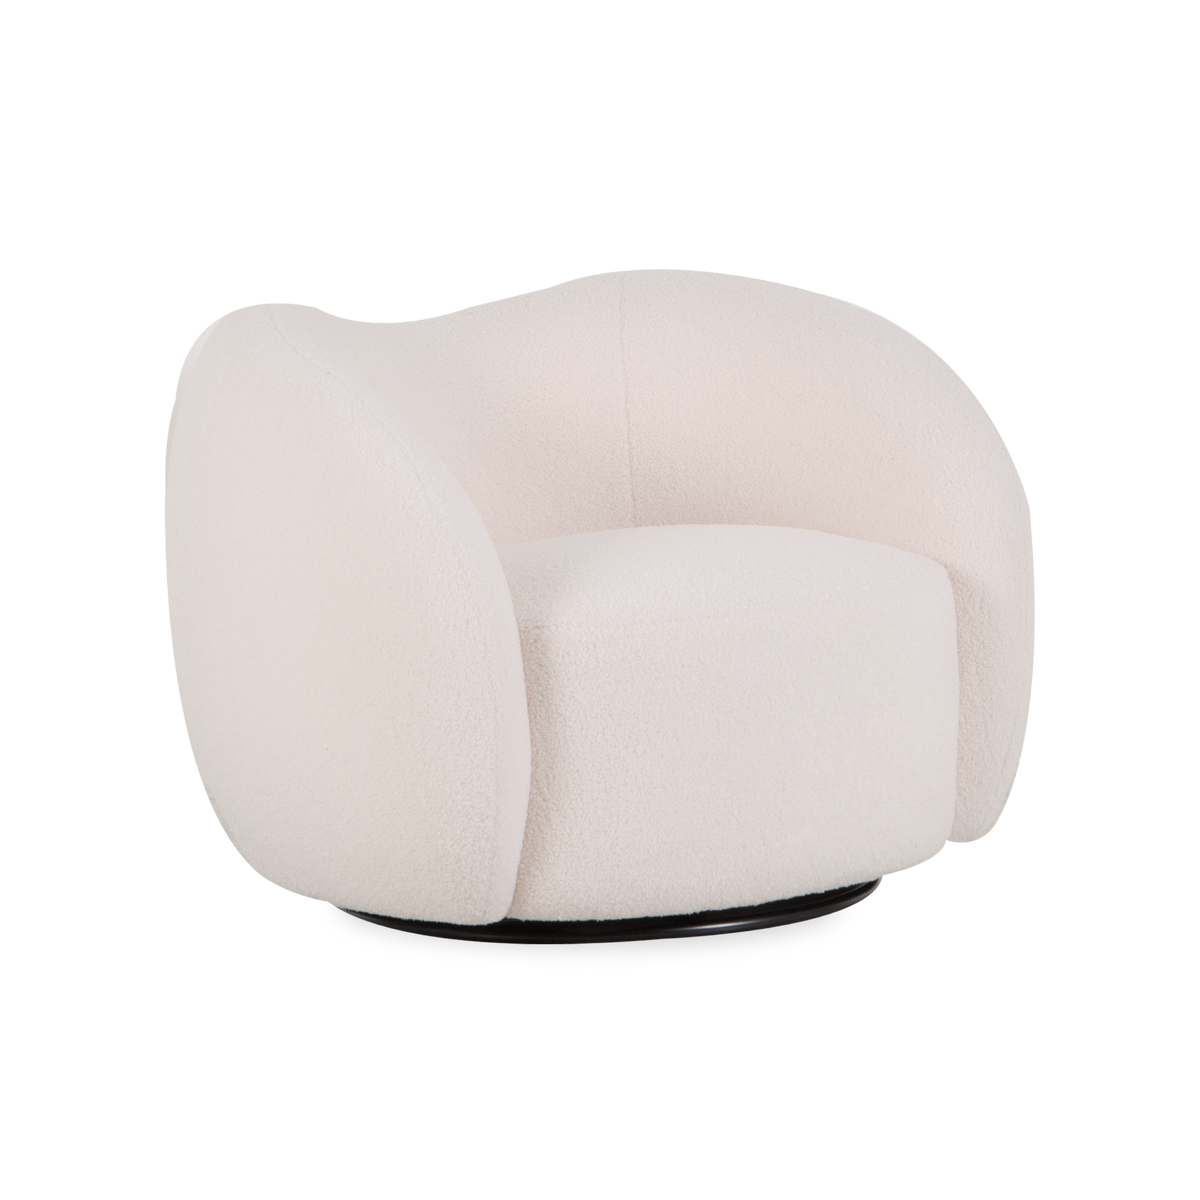 Uber soft, the Alpine Lounge Chair introduces distinctive curves that will have you sitting you in style.